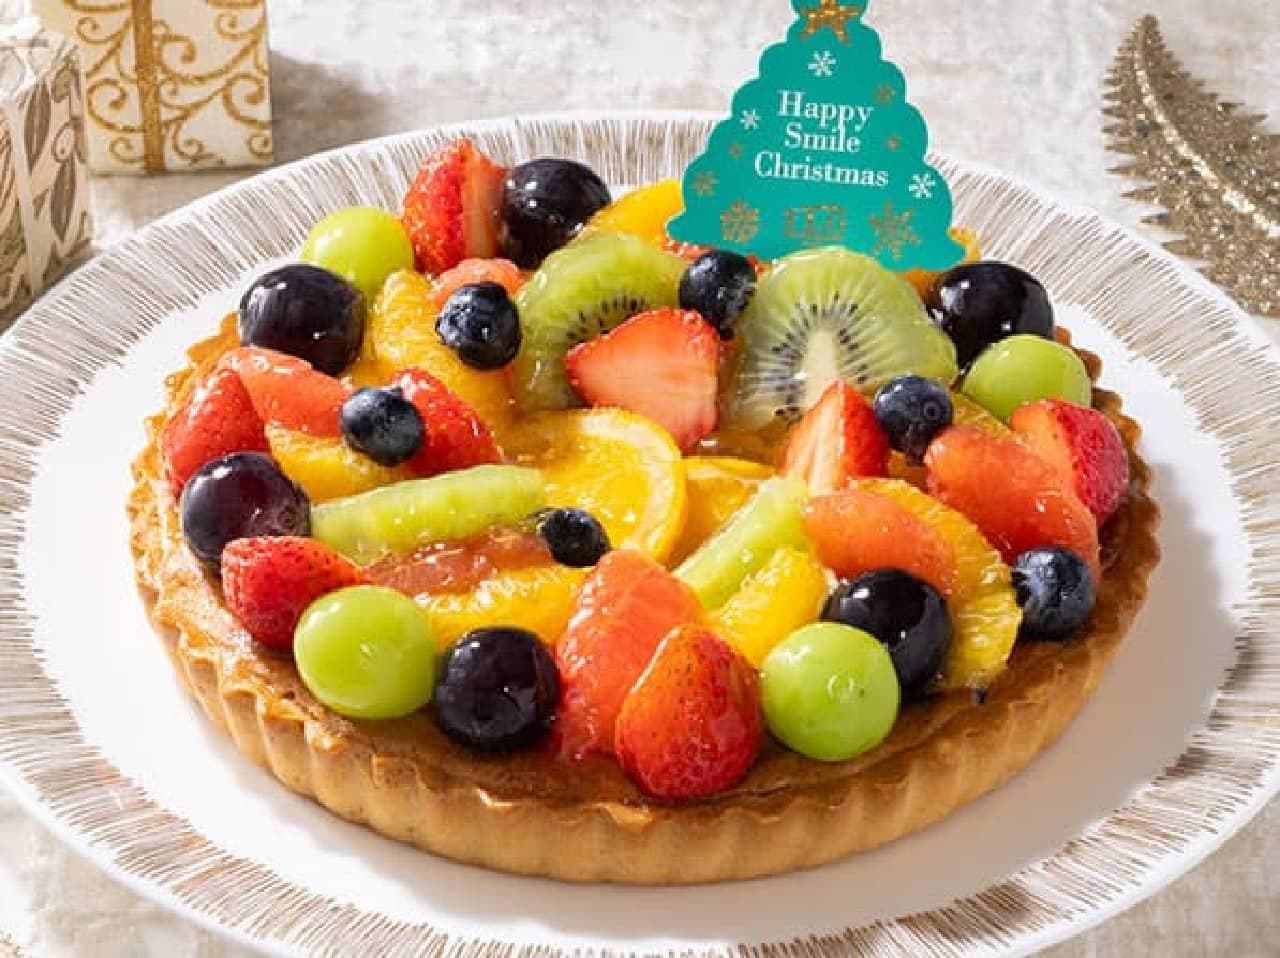 Flo "Xmas Tarte Frui - with rum-scented dried fruits